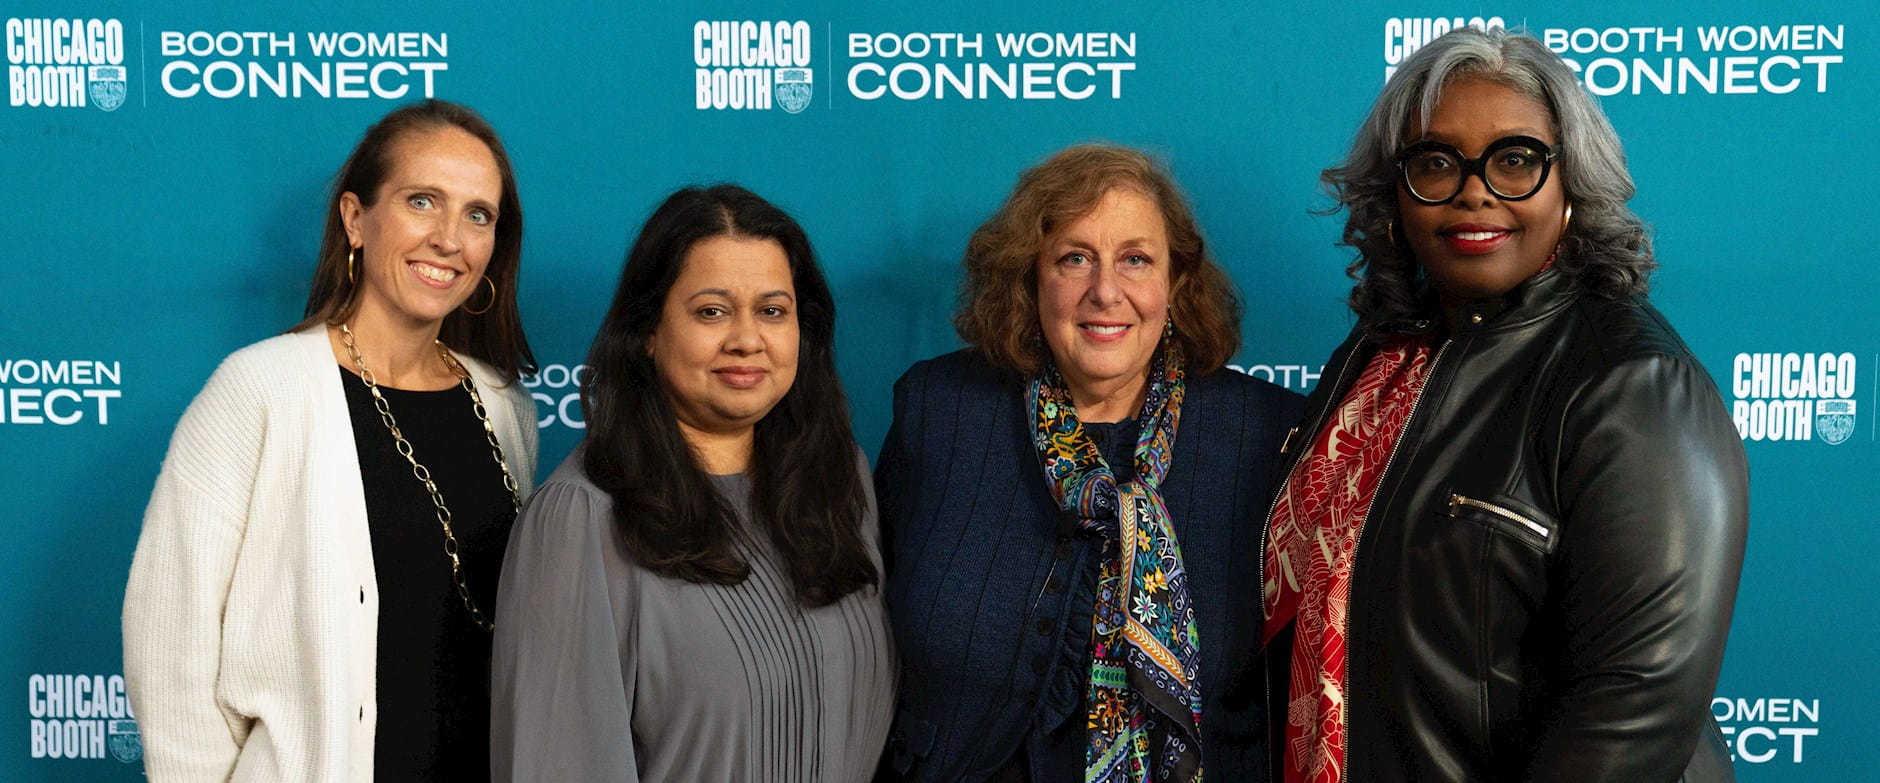 Nicole Yelsey, Sabera Choudhury, Jan Anne Dubin, Angela Pace-Moody at Booth Women Connect